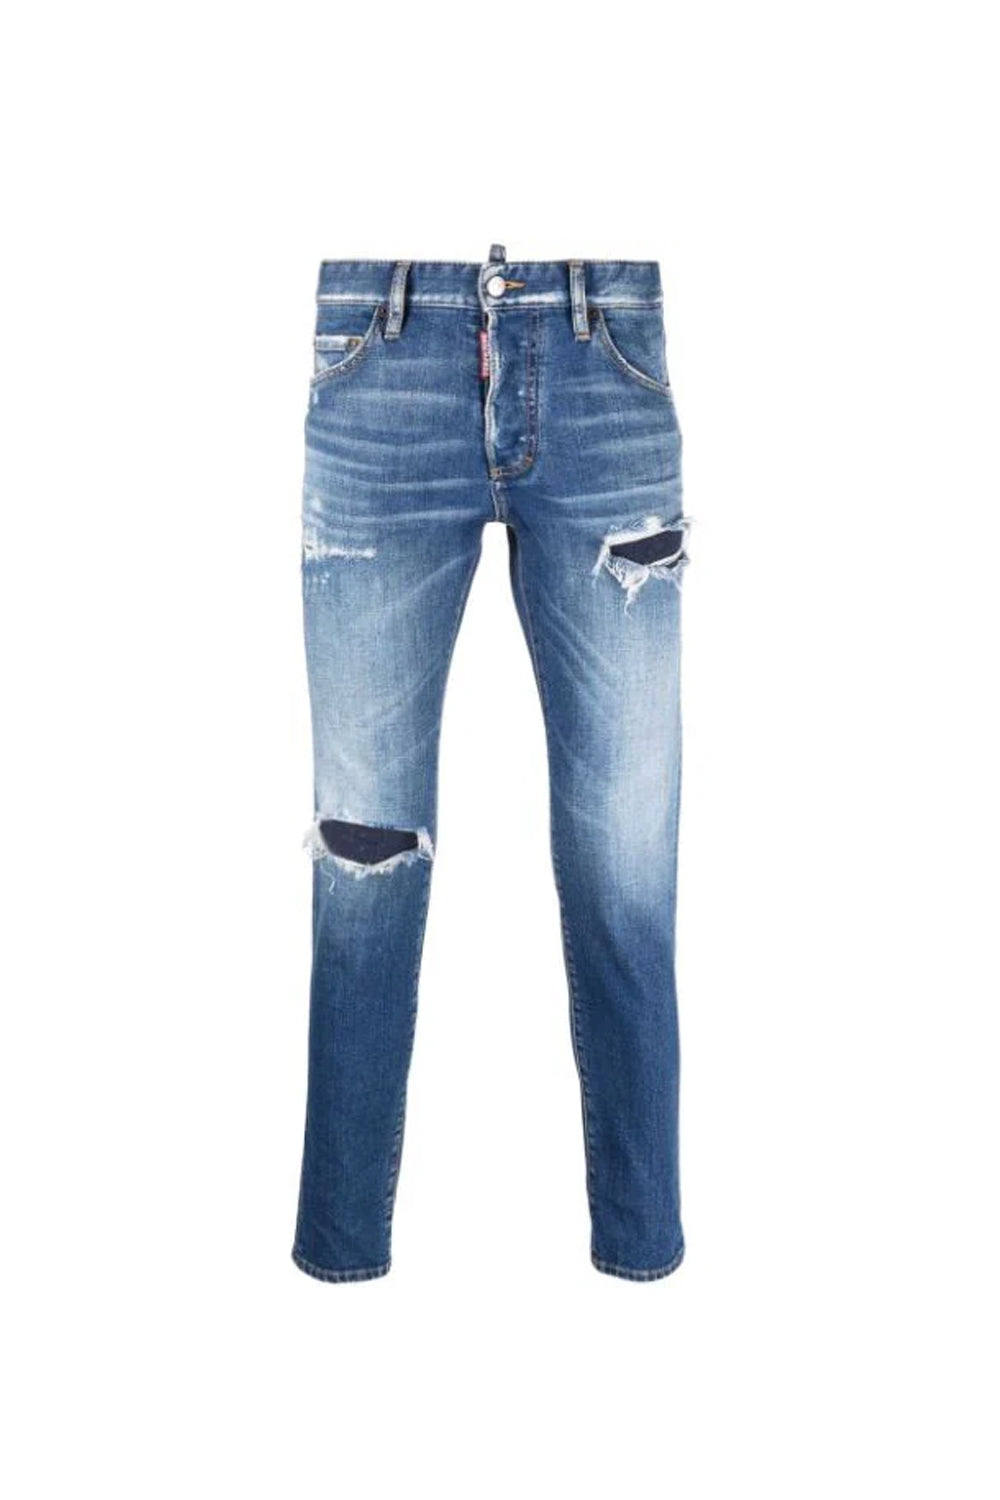 Dsquared2 mid-rise distressed straight-leg jeans‏